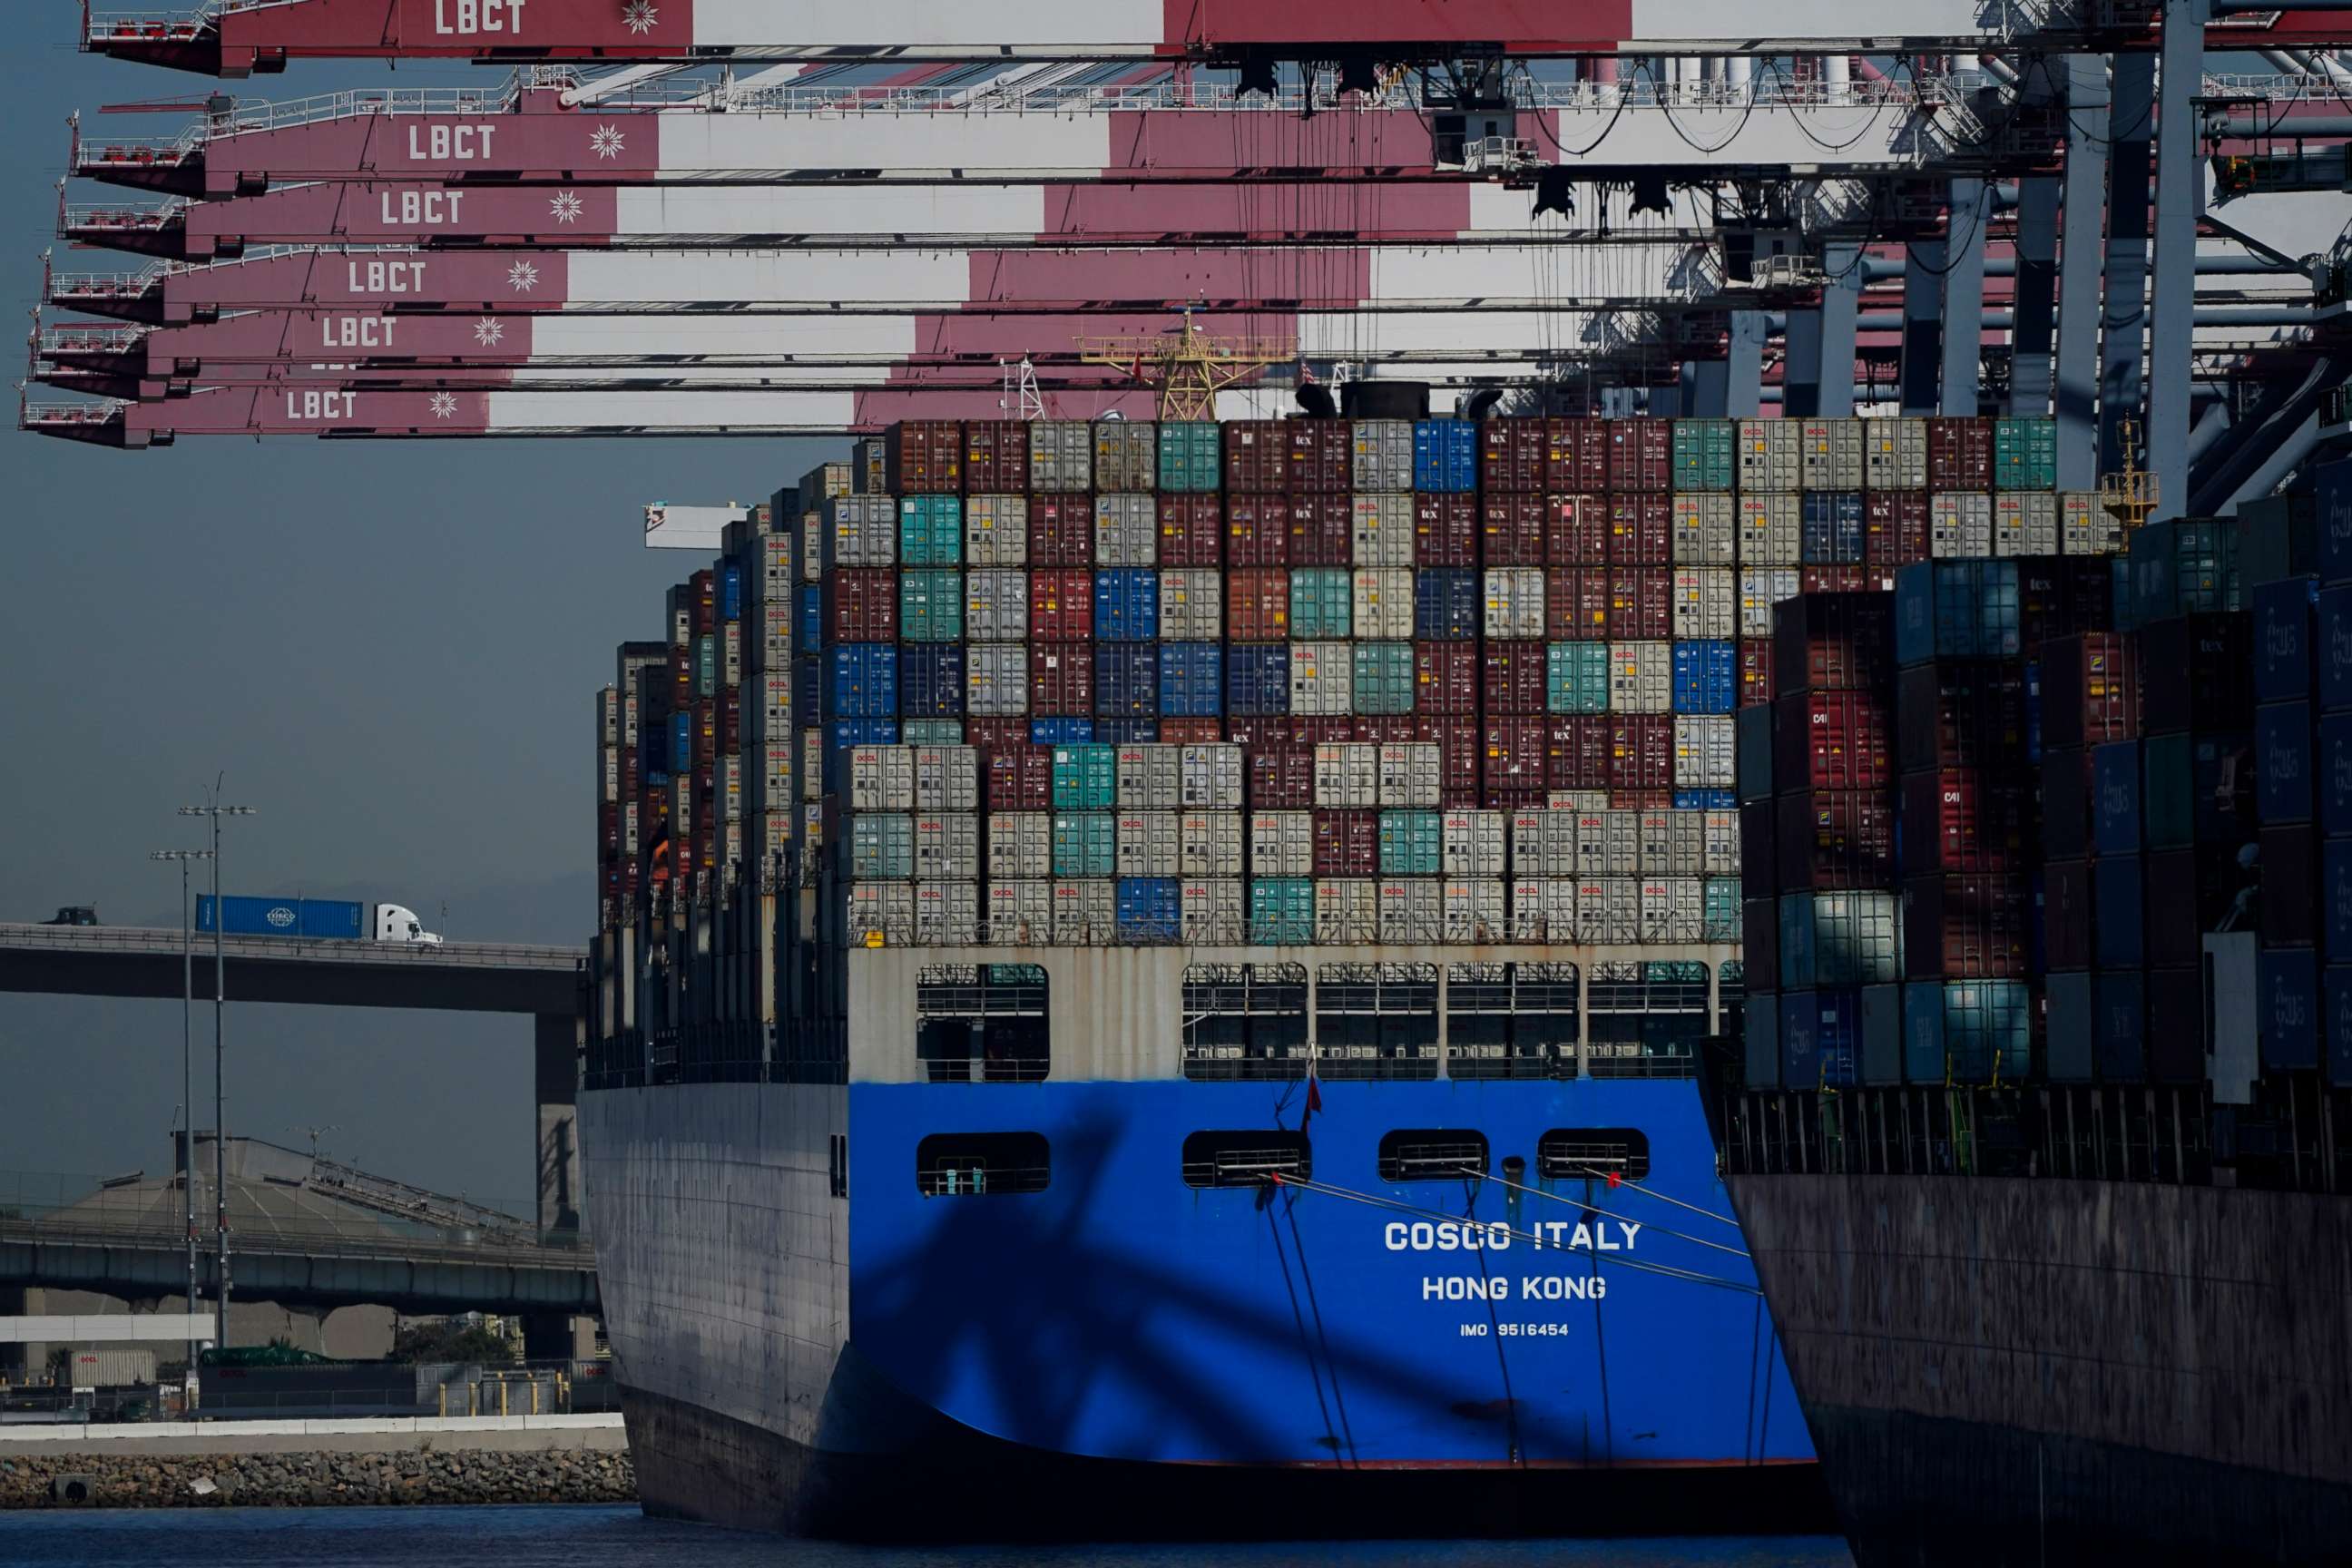 PHOTO: A Costco container ship is docked at the Port of Long Beach in Long Beach in Calif., Oct. 1, 2021.